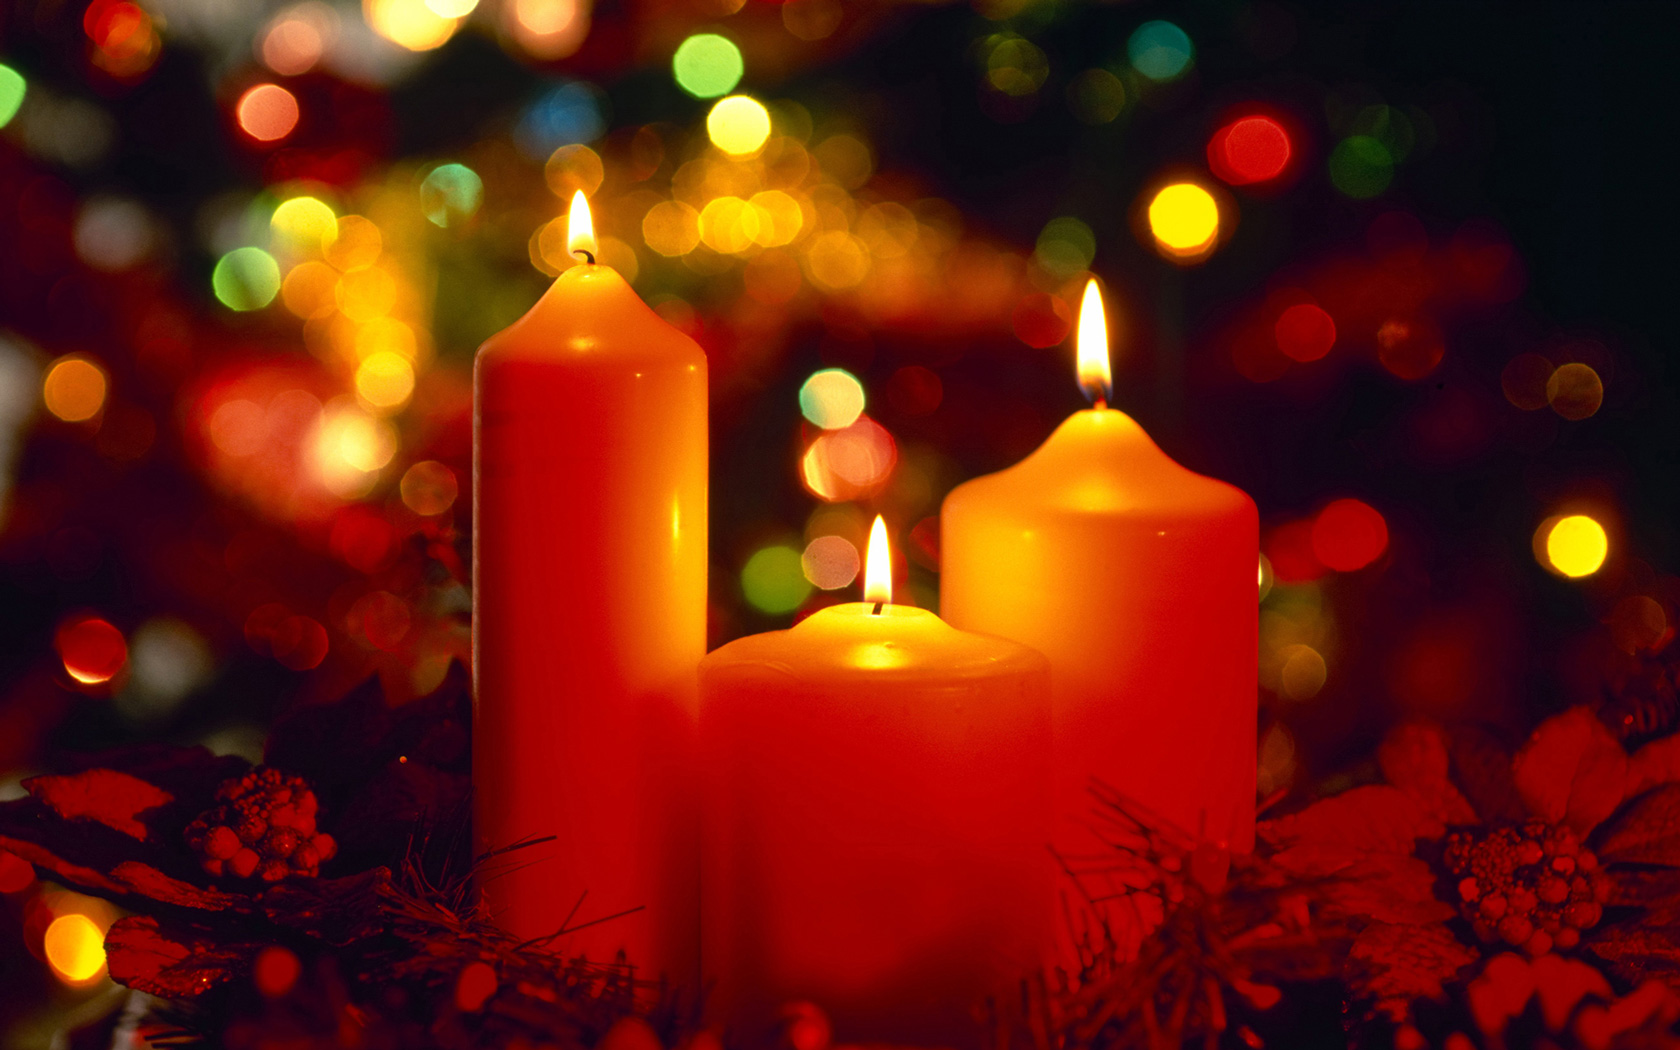 Christmas Candle Puter Desktop Wallpaper Pictures Image